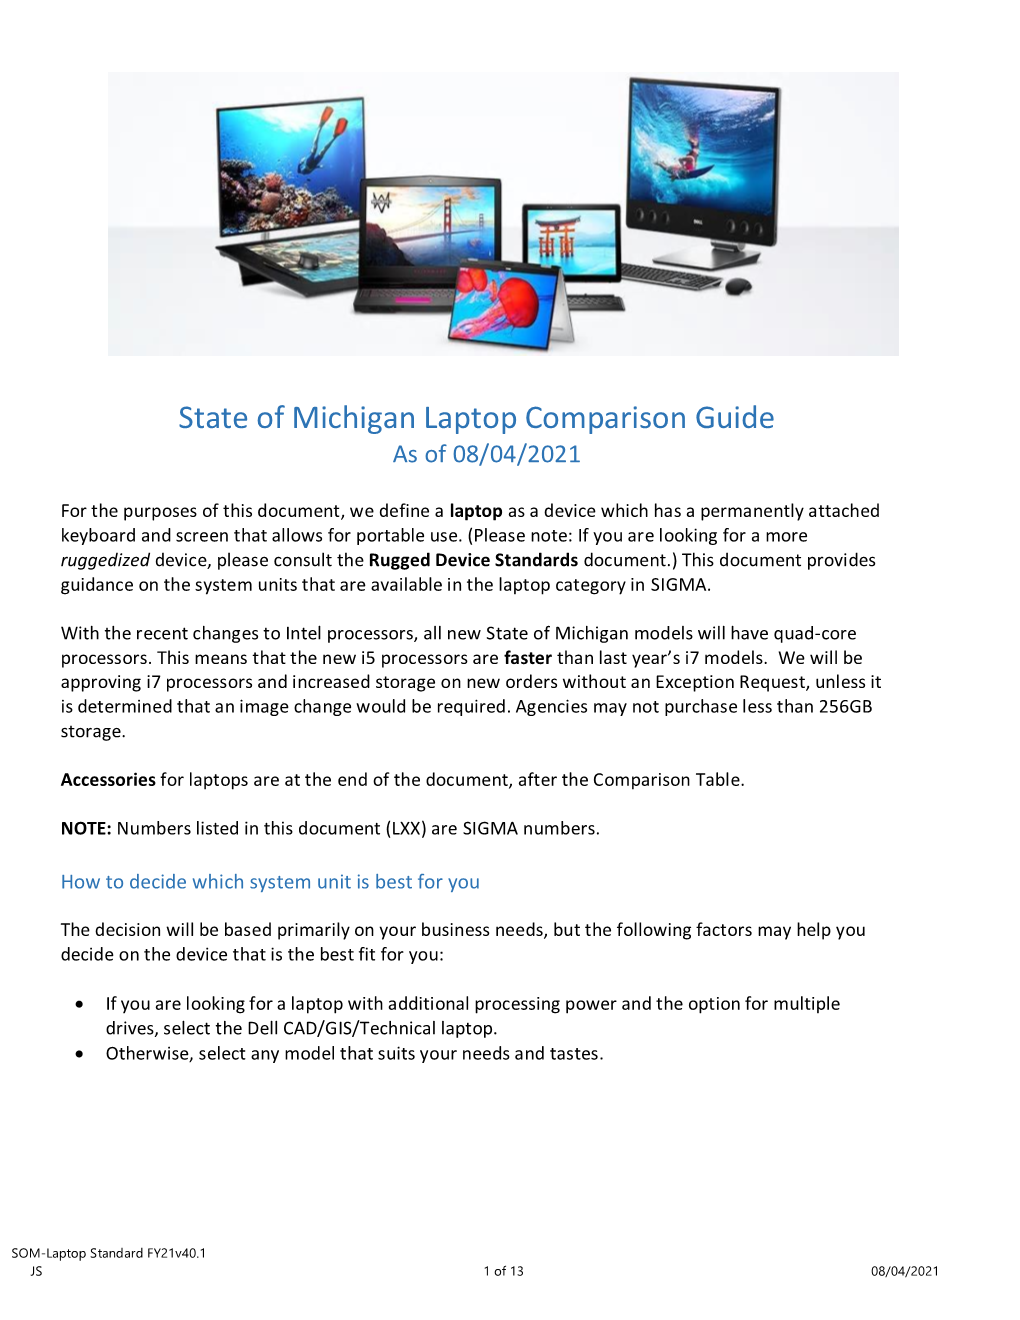 State of Michigan Laptop Comparison Guide As of 08/04/2021